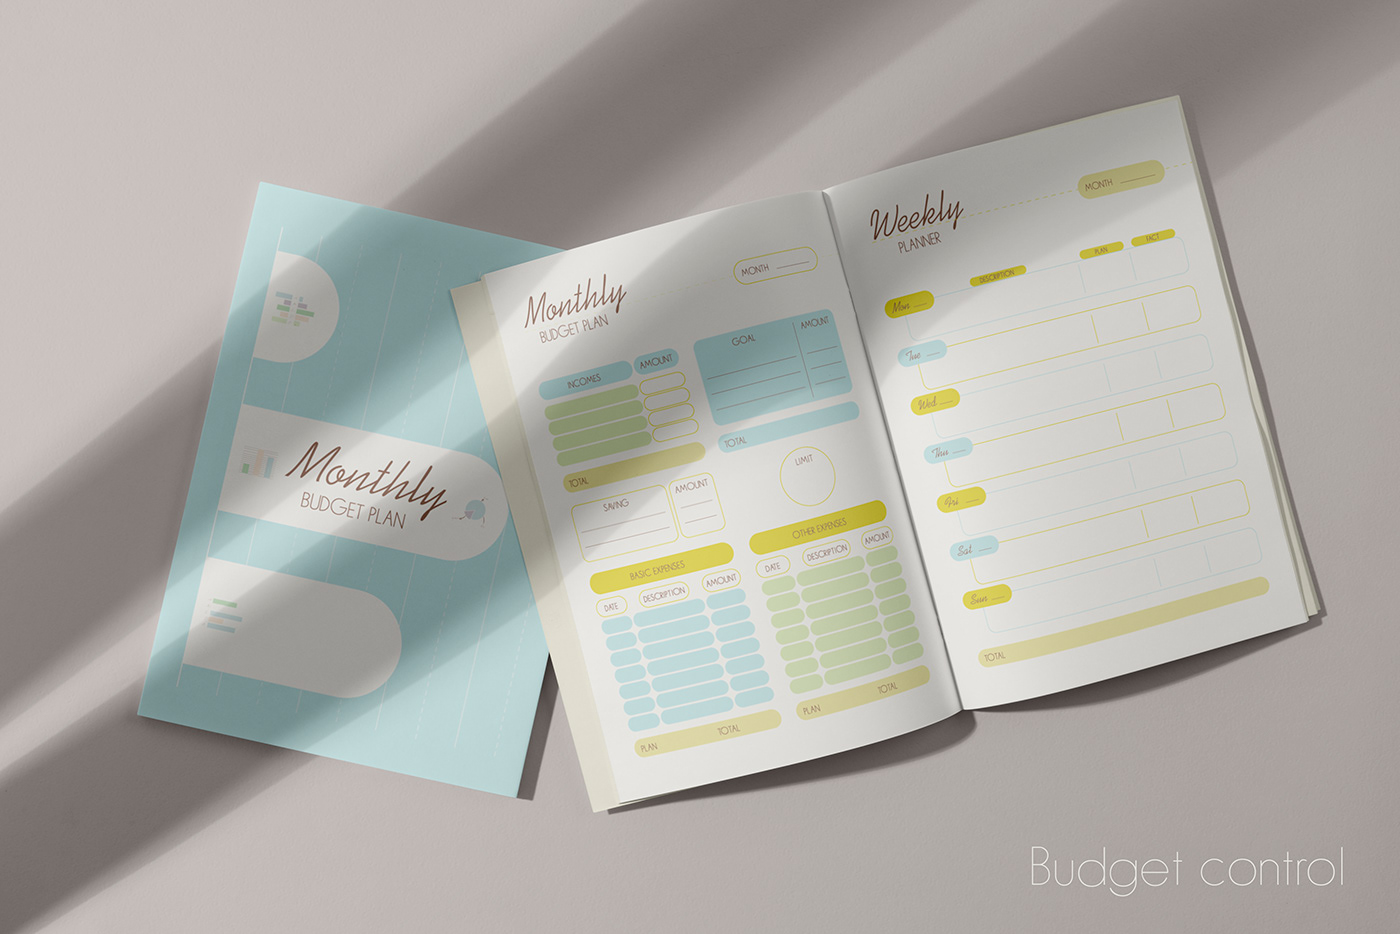 Budget Diary finance money monthly notebook planner weekly planner